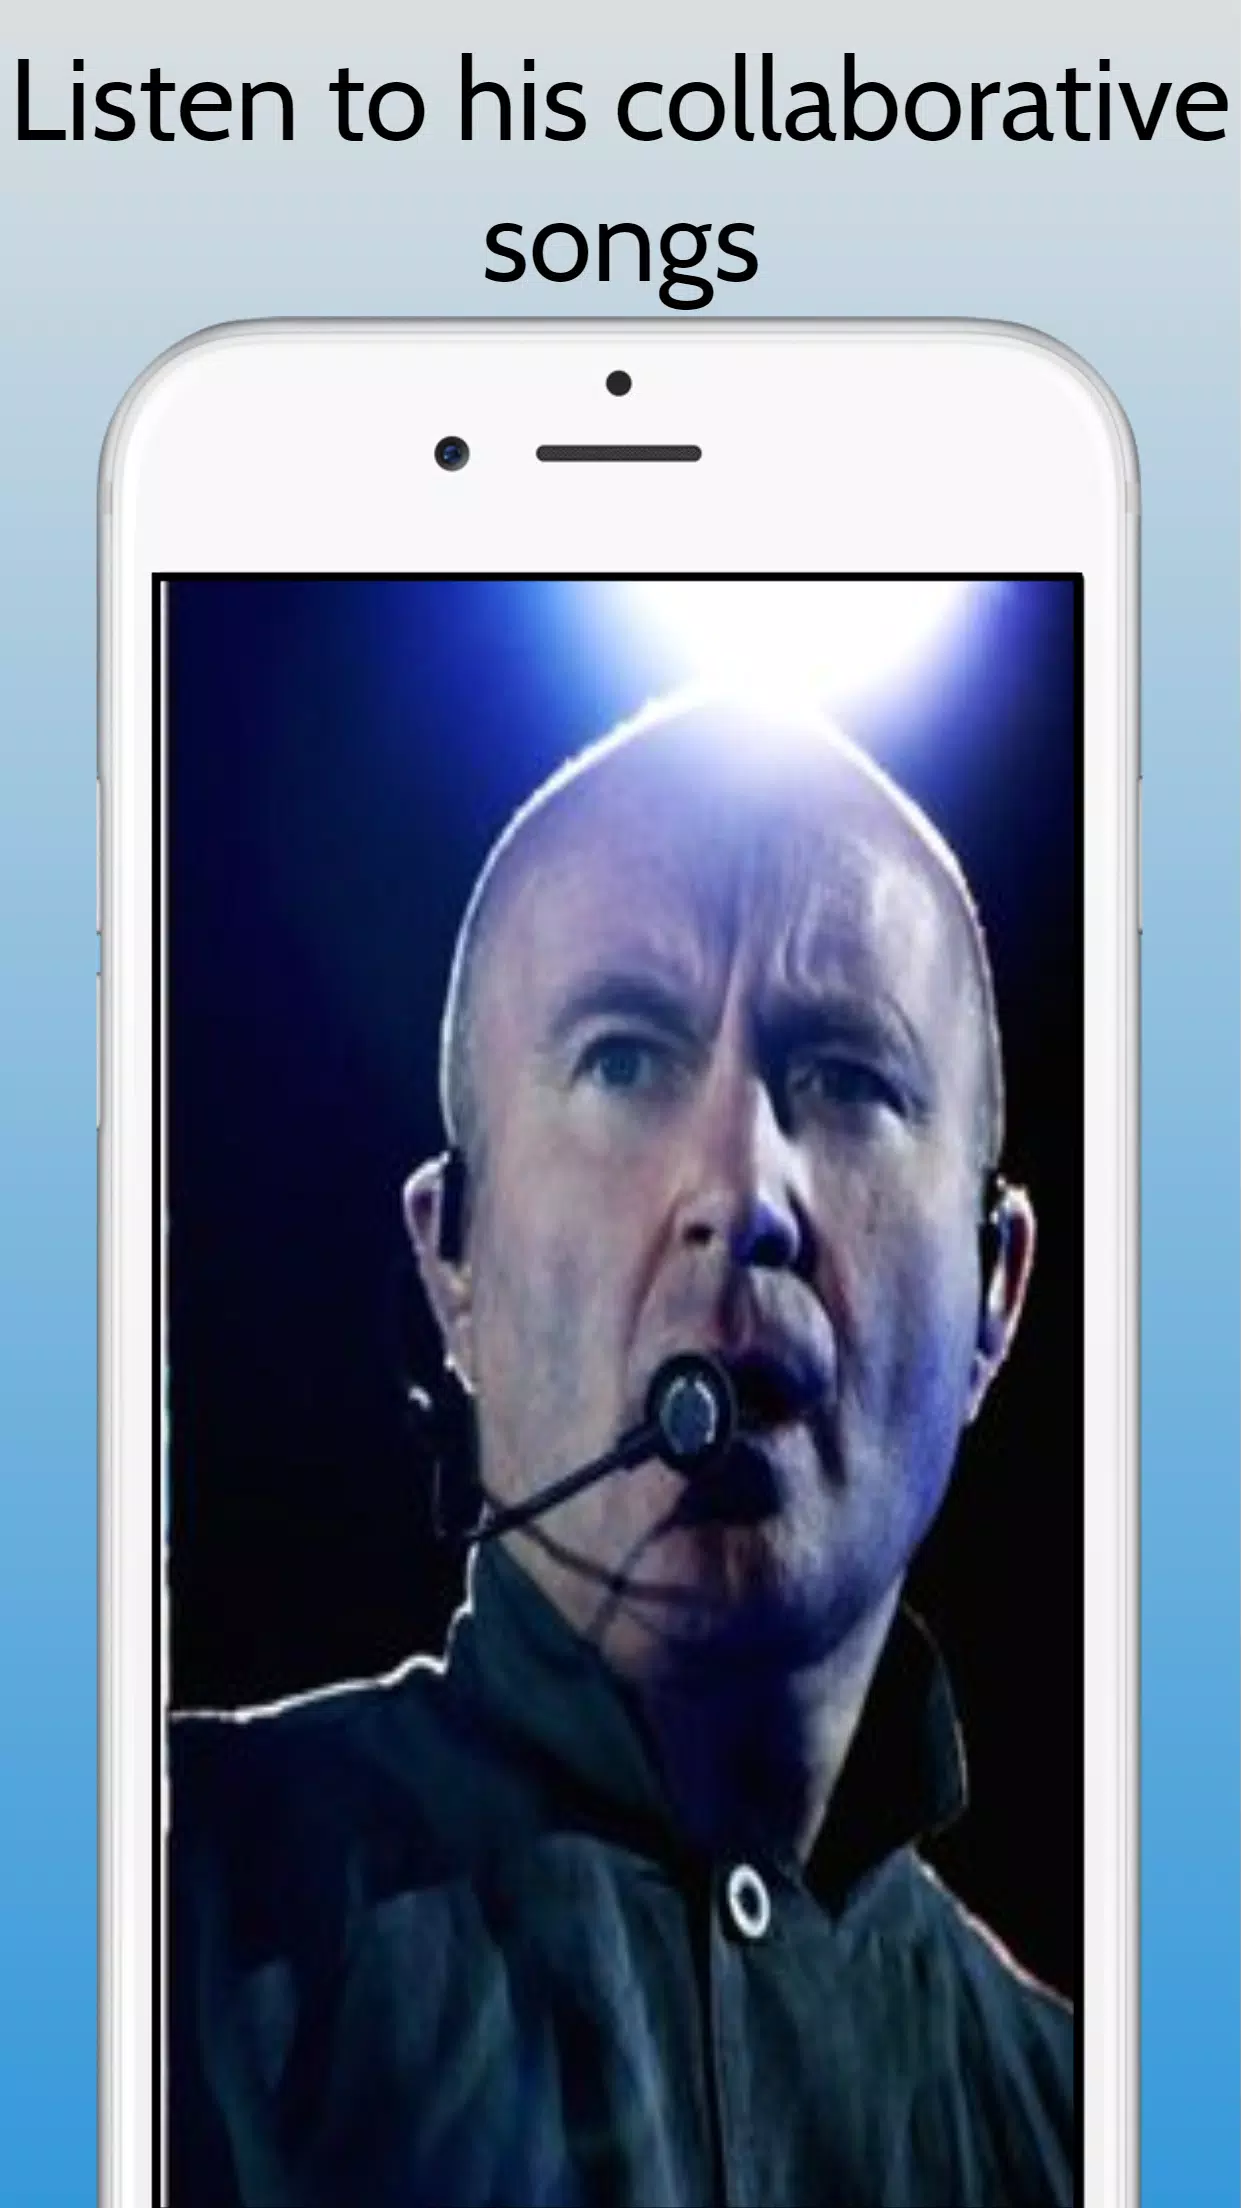 Phil Collins APK for Android Download